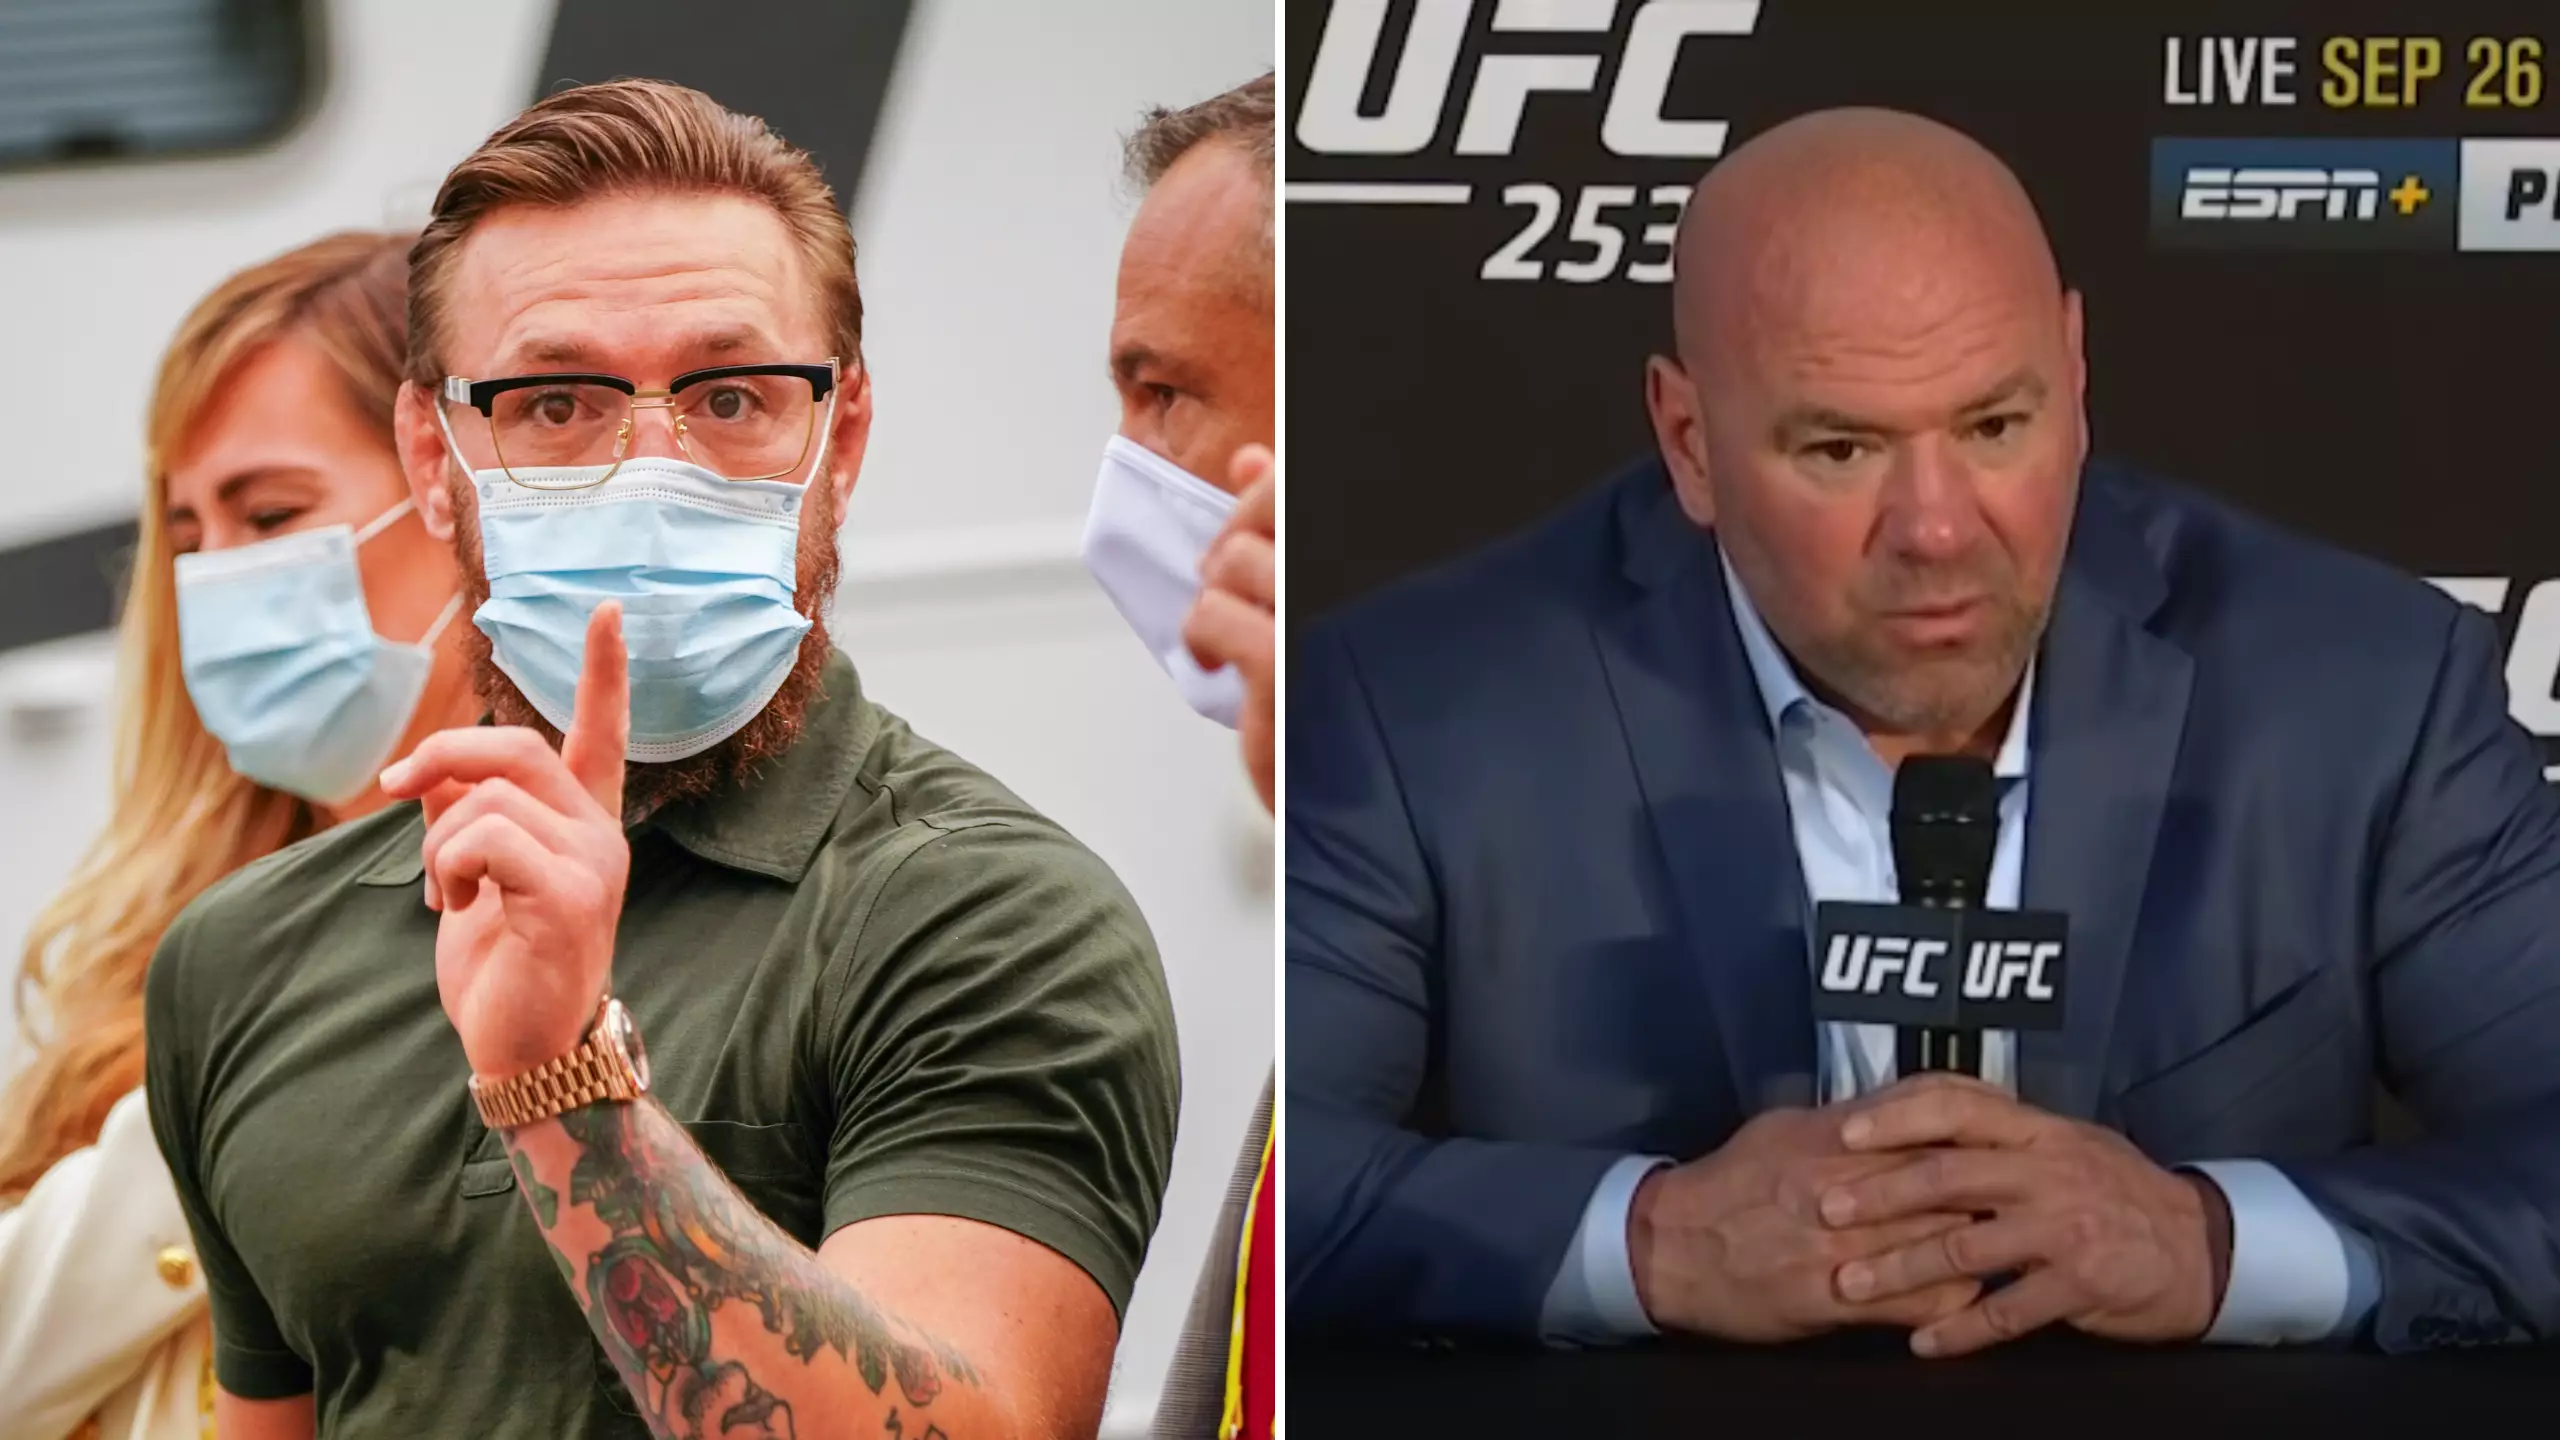 Conor McGregor Tells Dana White To "Stop Lying" As Their Public Spat Gets Even Uglier